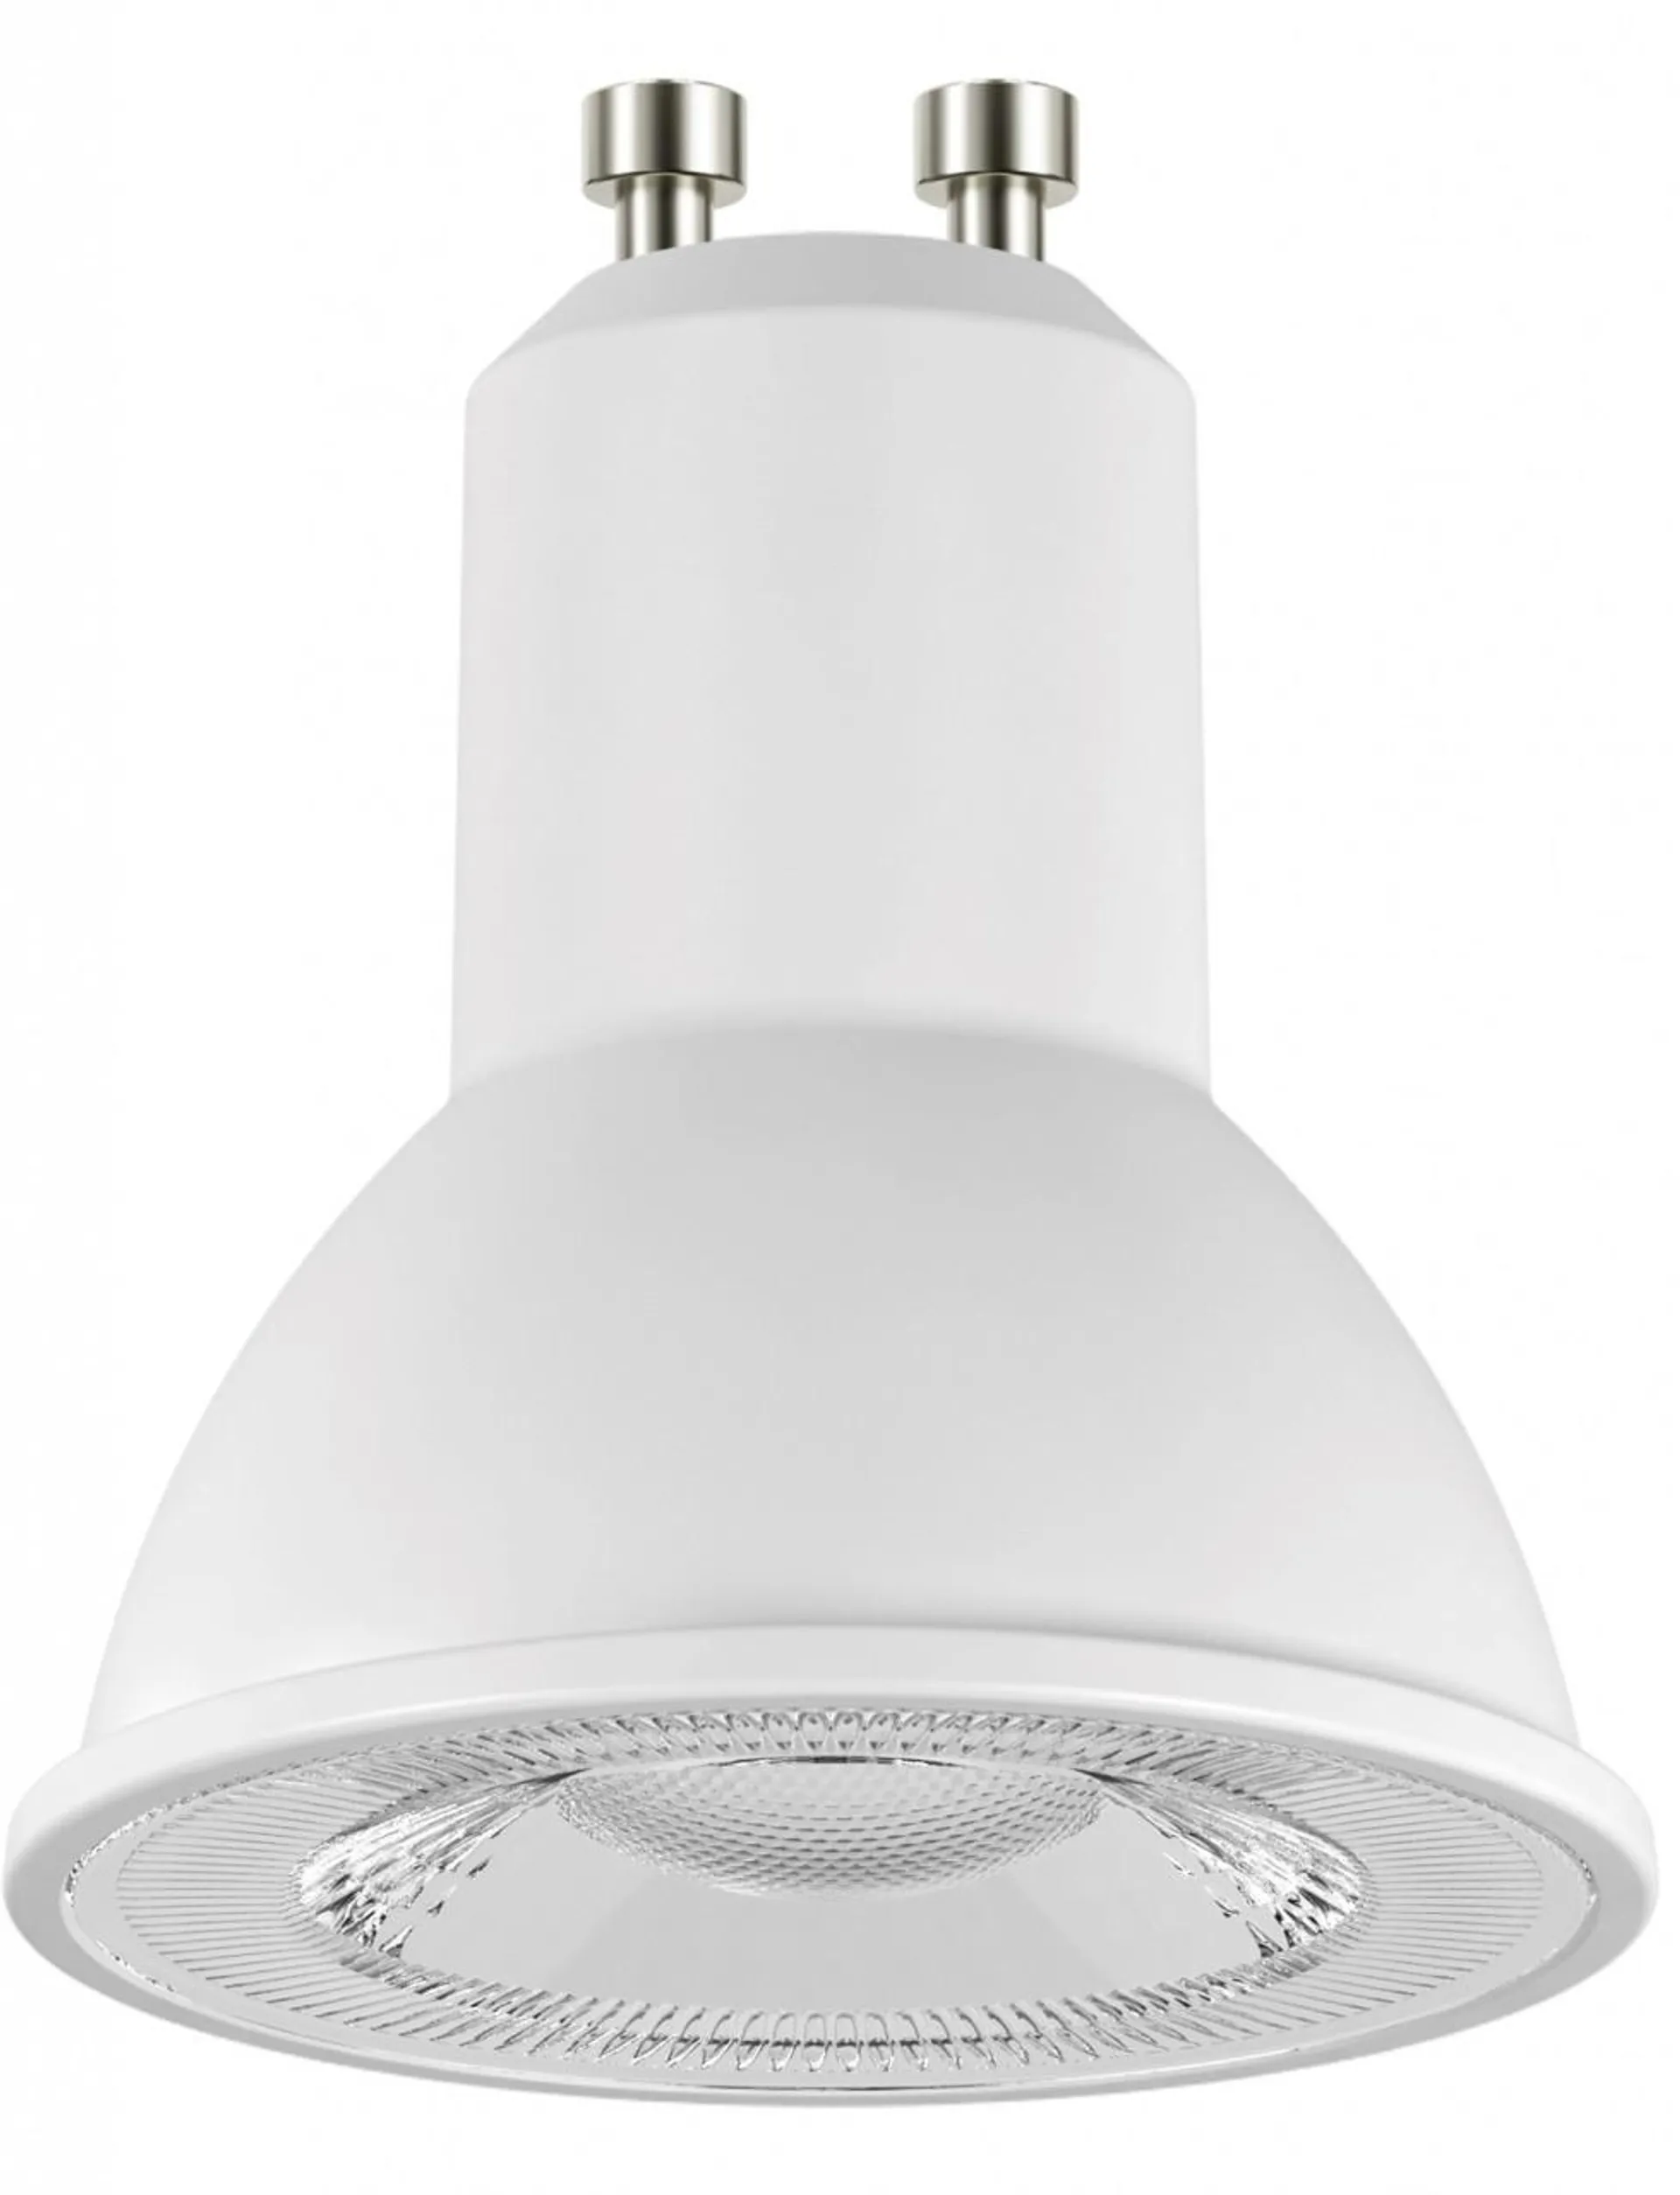 LED GU10 6.8W 700lm 3000k Dimmable